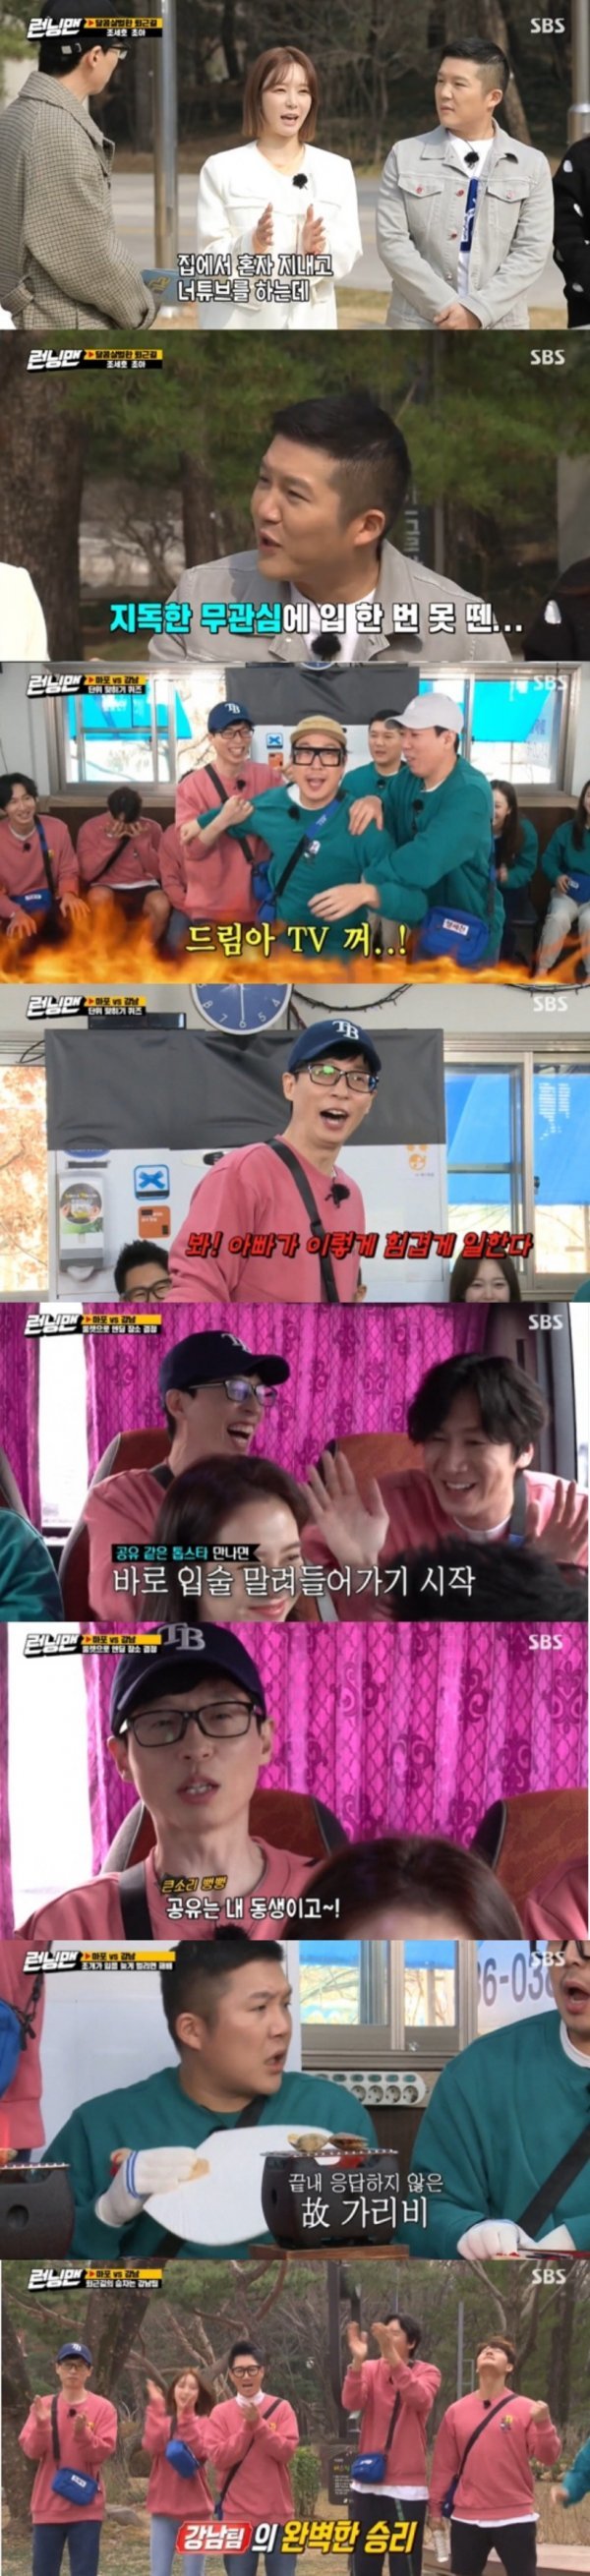 Running Man, which aired on the 11th, ranked first in the same time zone with an average of 2.5% of the SBSs main target, the 2049 ratings (hereinafter based on Nielsen Korea metropolitan area and households), and the highest audience rating per minute jumped to 6.5%.On this day, Race was decorated with Sweet and bloody way home race after finishing in the winning team area, and Jo Se-ho and Park Choa were guest.Yoo Jae-Suk, Ji Seok-jin, Kim Jong-kook, Lee Kwang-soo, Park Choa were divided into Gangnam District Team, Haha, Song Ji-hyo, Jeon So-min, Yang Se-chan, and Jo Se-ho were divided into DJ Maphorisa Team, and Gangnam District Team Kim Jong-kook was divided into 1 in Premission He took the first mission place as a Banpo.The first mission was a quiz, and the Gangnam District team, which was filled with brains, cheered.Unexpectedly, the Kang team continued to struggle, and DJ Maphorisa team took the victory by hitting the quiz problem in succession.DJ Maphorisa team Choices Dongbinggo-dong as next mission sitePark Choa and Jo Se-ho laughed with a variety of recent talks.Park Choa, who joined Running Man in six years, said, I have been lying down for three years and I am familiar with TV.Jo Se-ho disclosed the privacy of Lee Kwang-soo and Yoo Jae-Suk with health field talk.Jo Se-ho started the talk by describing Lee Kwang-soos distorted expression, saying, Lee Kwang-soo does a health with the weight that should not be done. Lee Kwang-soo said, Yoo Jae-Suk points out when he meets Jo Se-ho at the gym, I laughed.The Gangnam District team won all the missions in Dongbinggo-dong and Gangnam District, preempting the favorable highlands and winning the final mission in Yeoksam-dong with Park Choas performance.In the end, the final ending area was also Choicesed to Gangnam District, which secured a lot of roulette compartments, and Gangnam District Ending was conducted.The Gangnam District team took the famous rice cake set of Gangnam District, and DJ Maphorisa team had the bad luck of going to a long way home.The scene was the highest audience rating of 6.5% per minute, accounting for the best one minute.